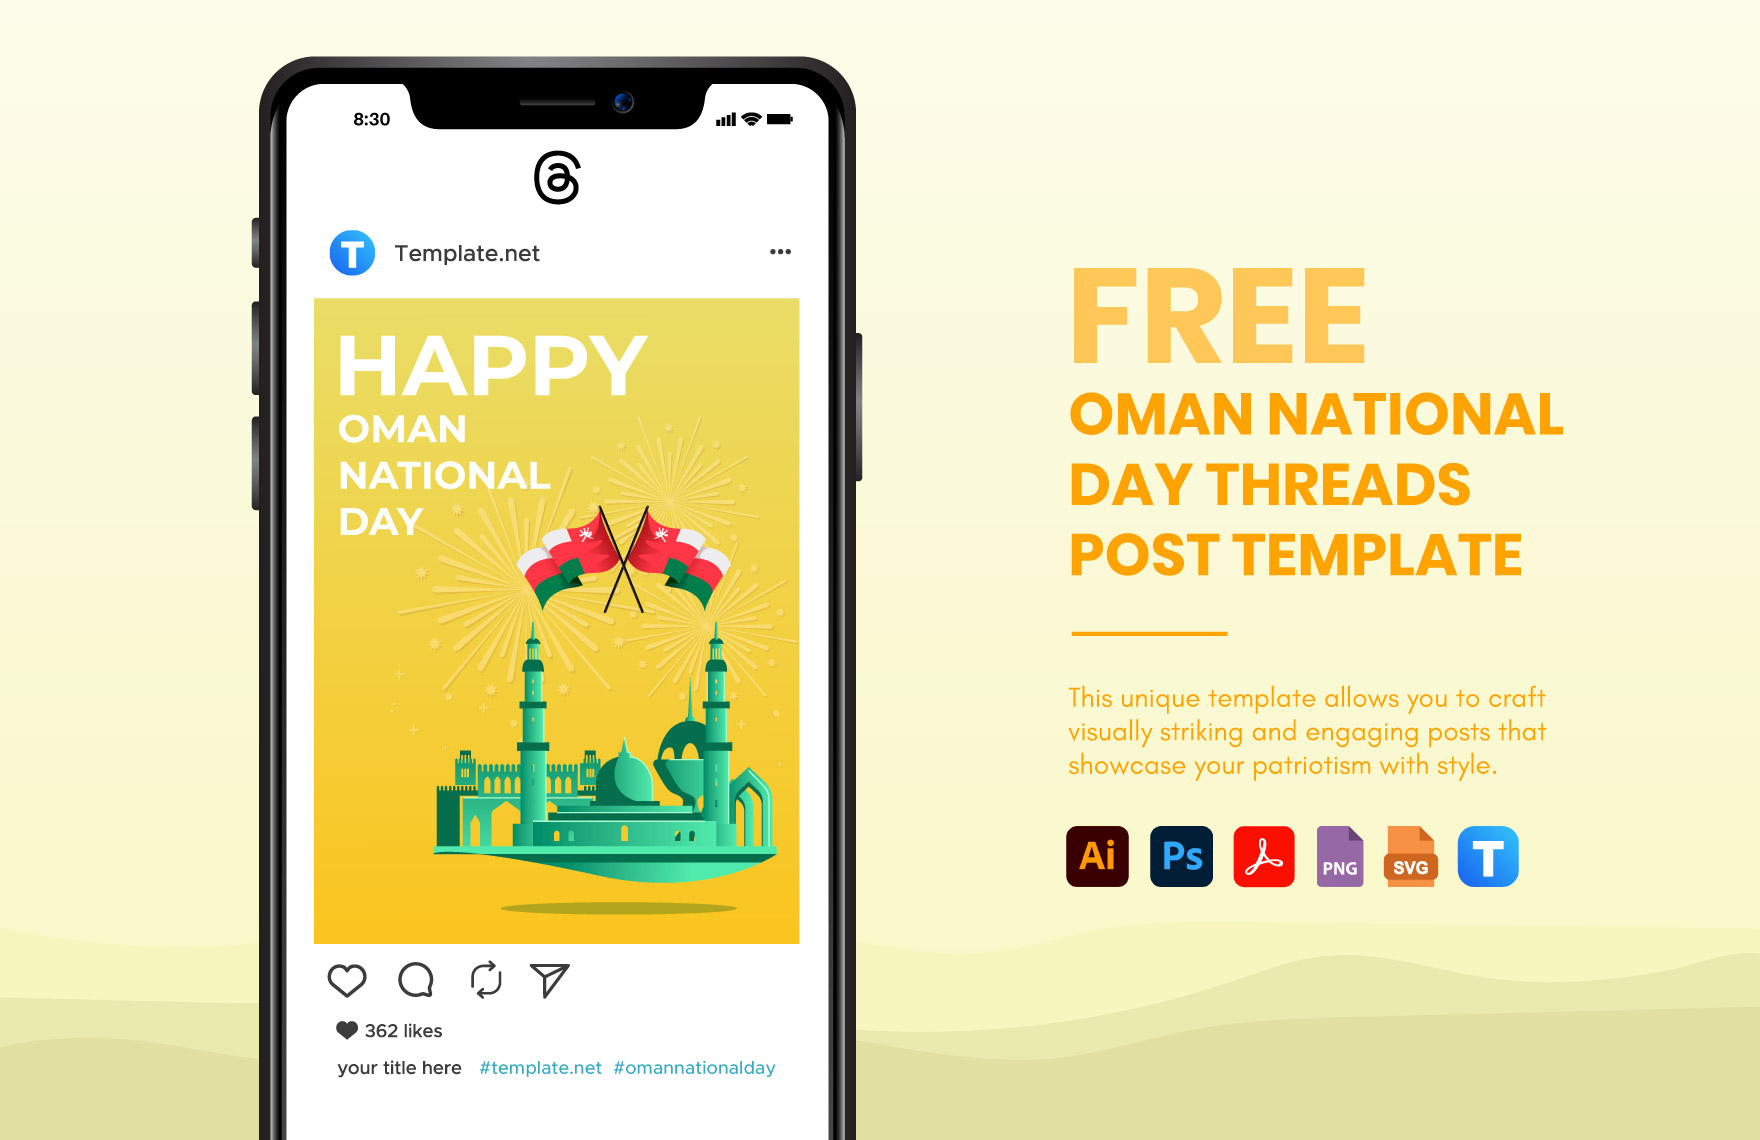 Oman National Day Threads Post Template